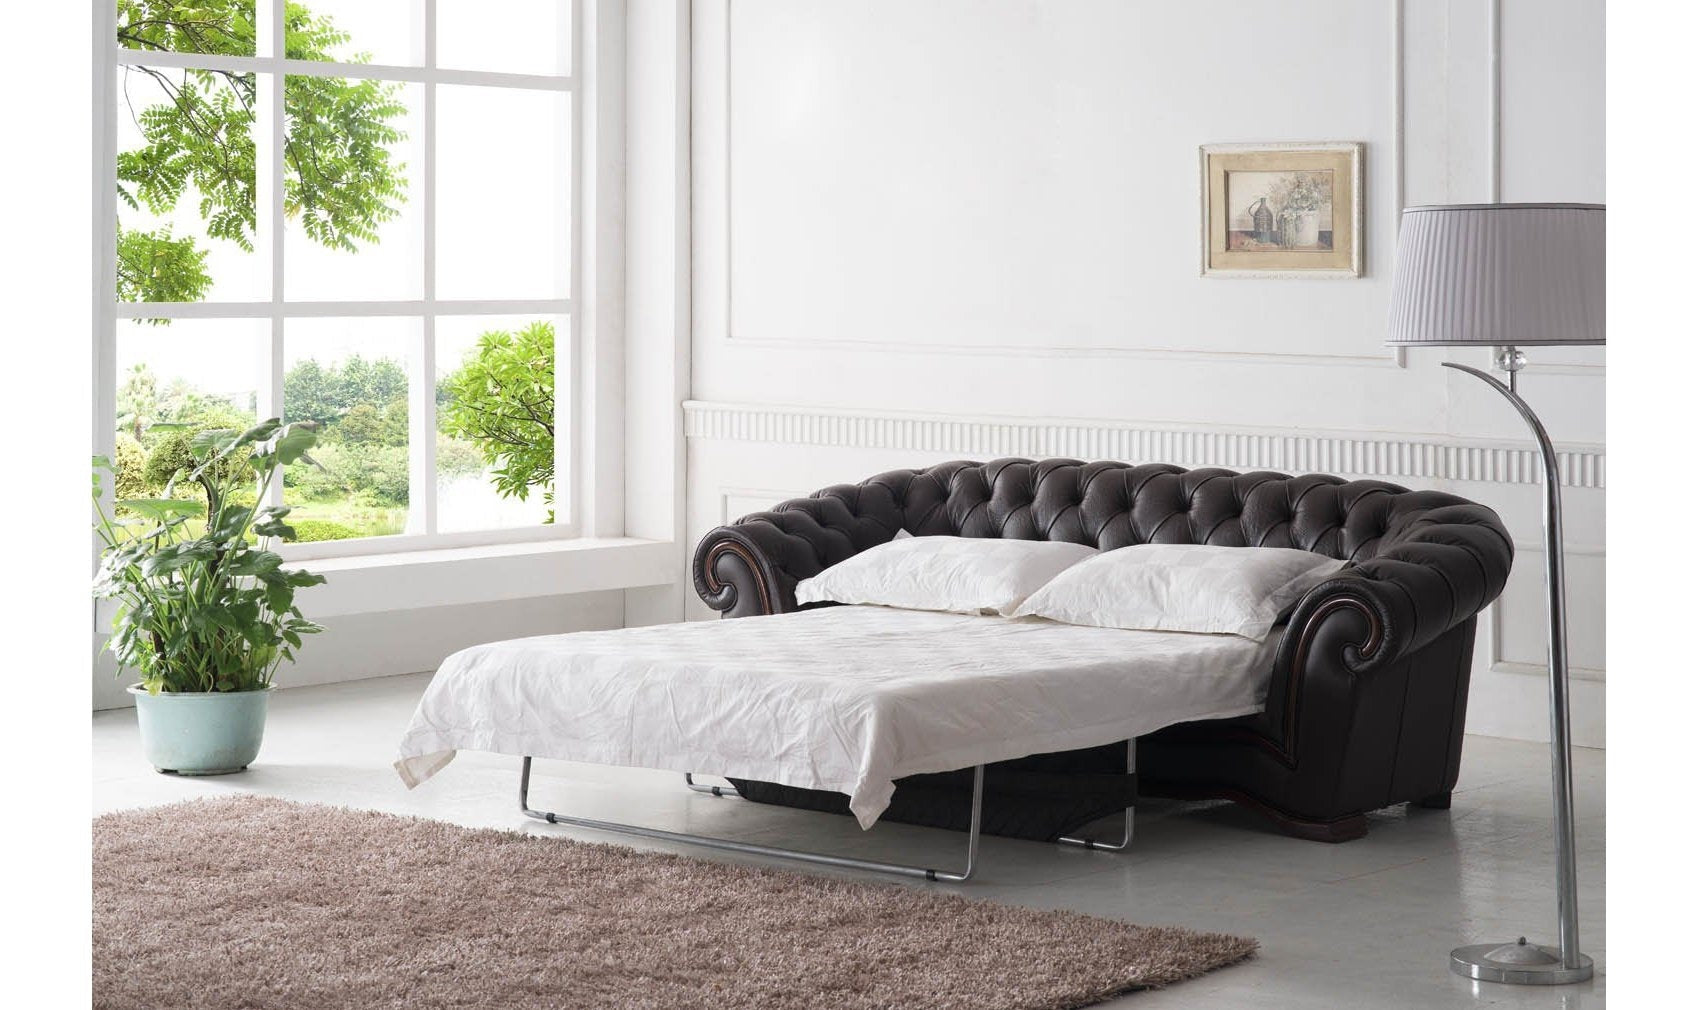 What types of sofa beds are most comfortable?